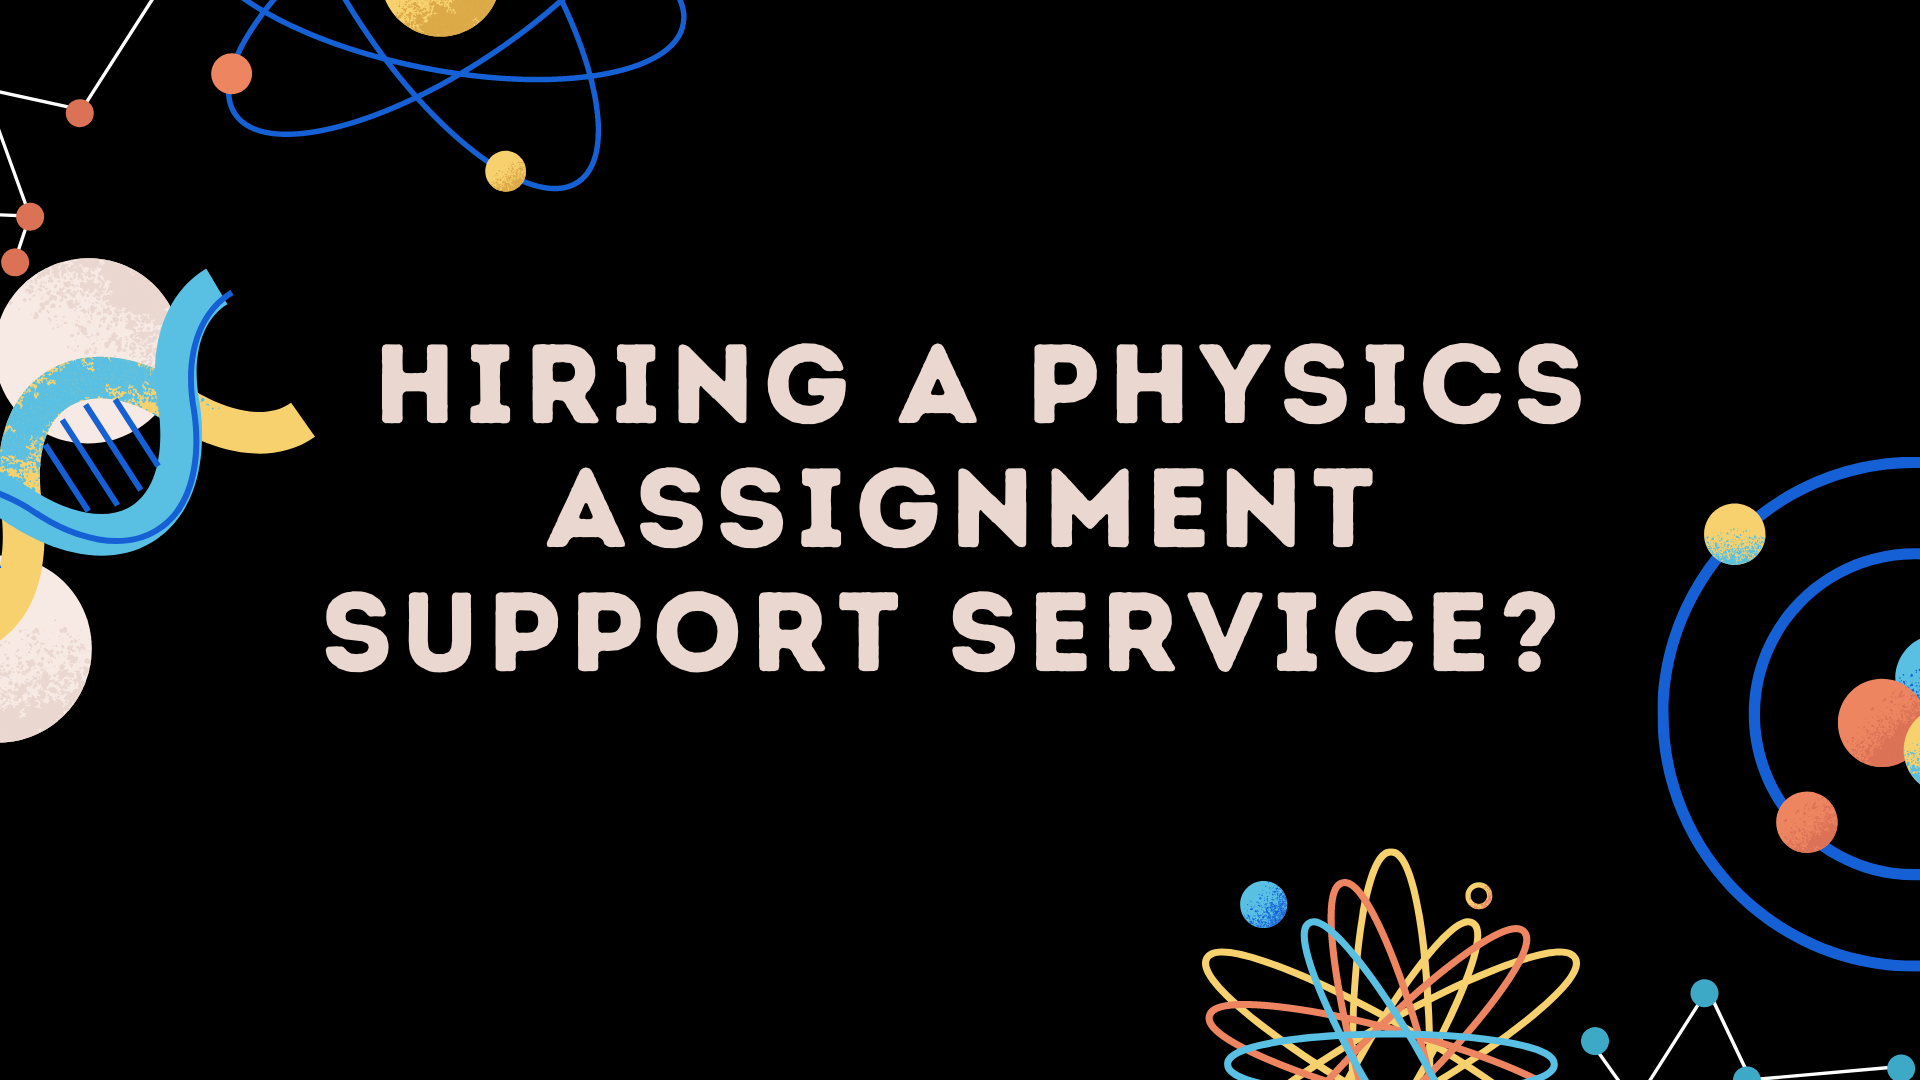 Physics assignment assistance